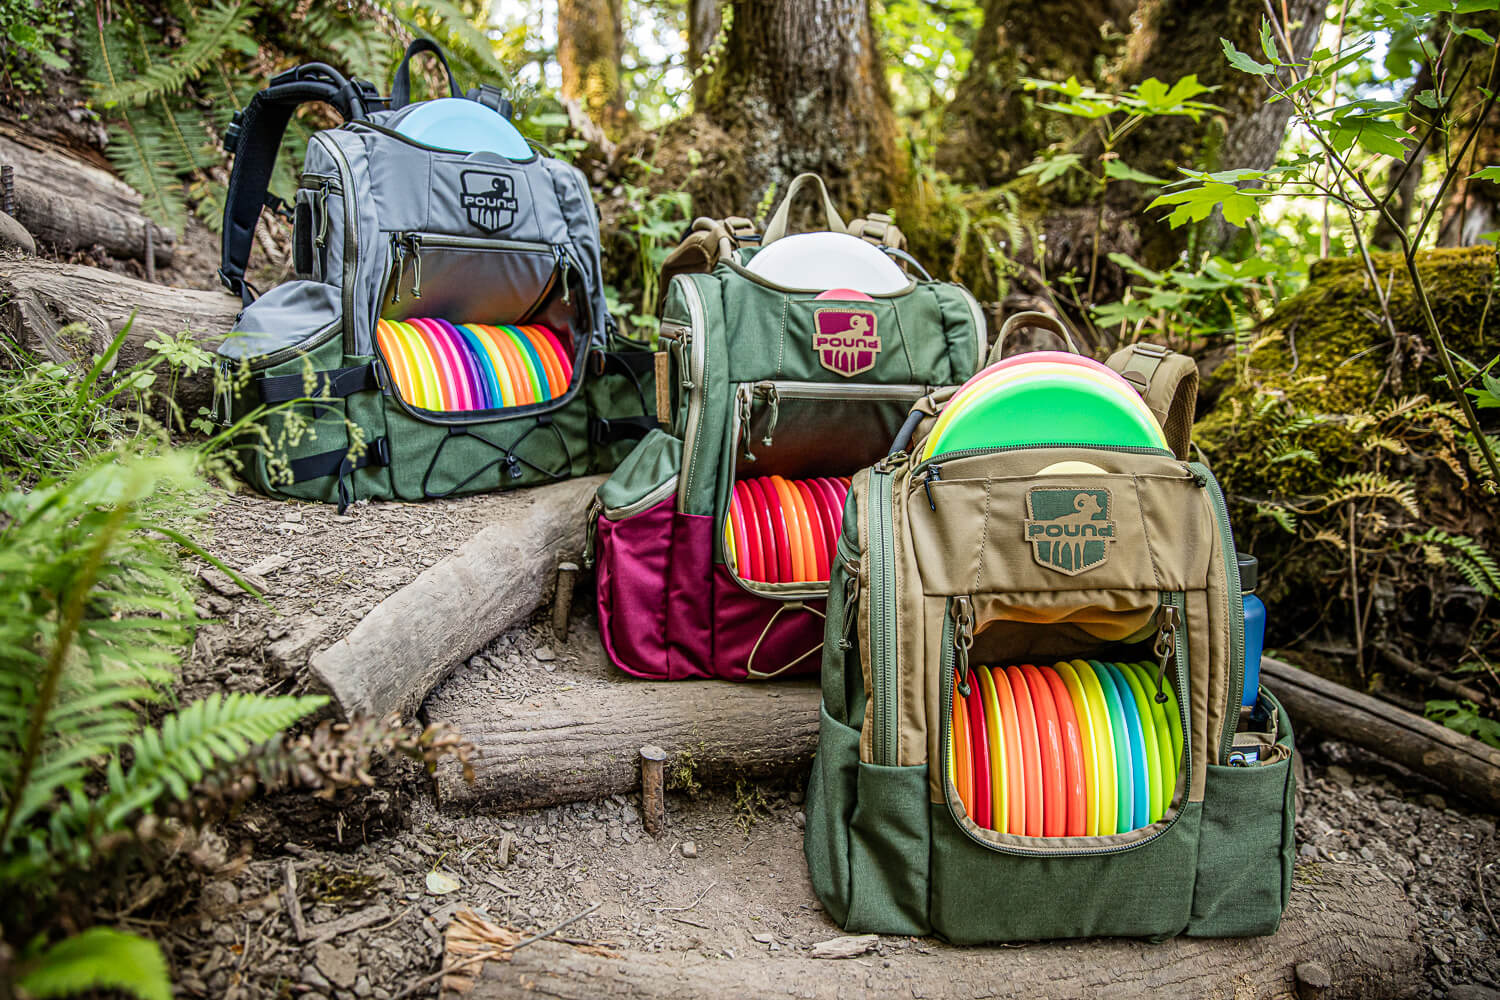 Three Pound disc golf bags sitting on a trail in the woods.